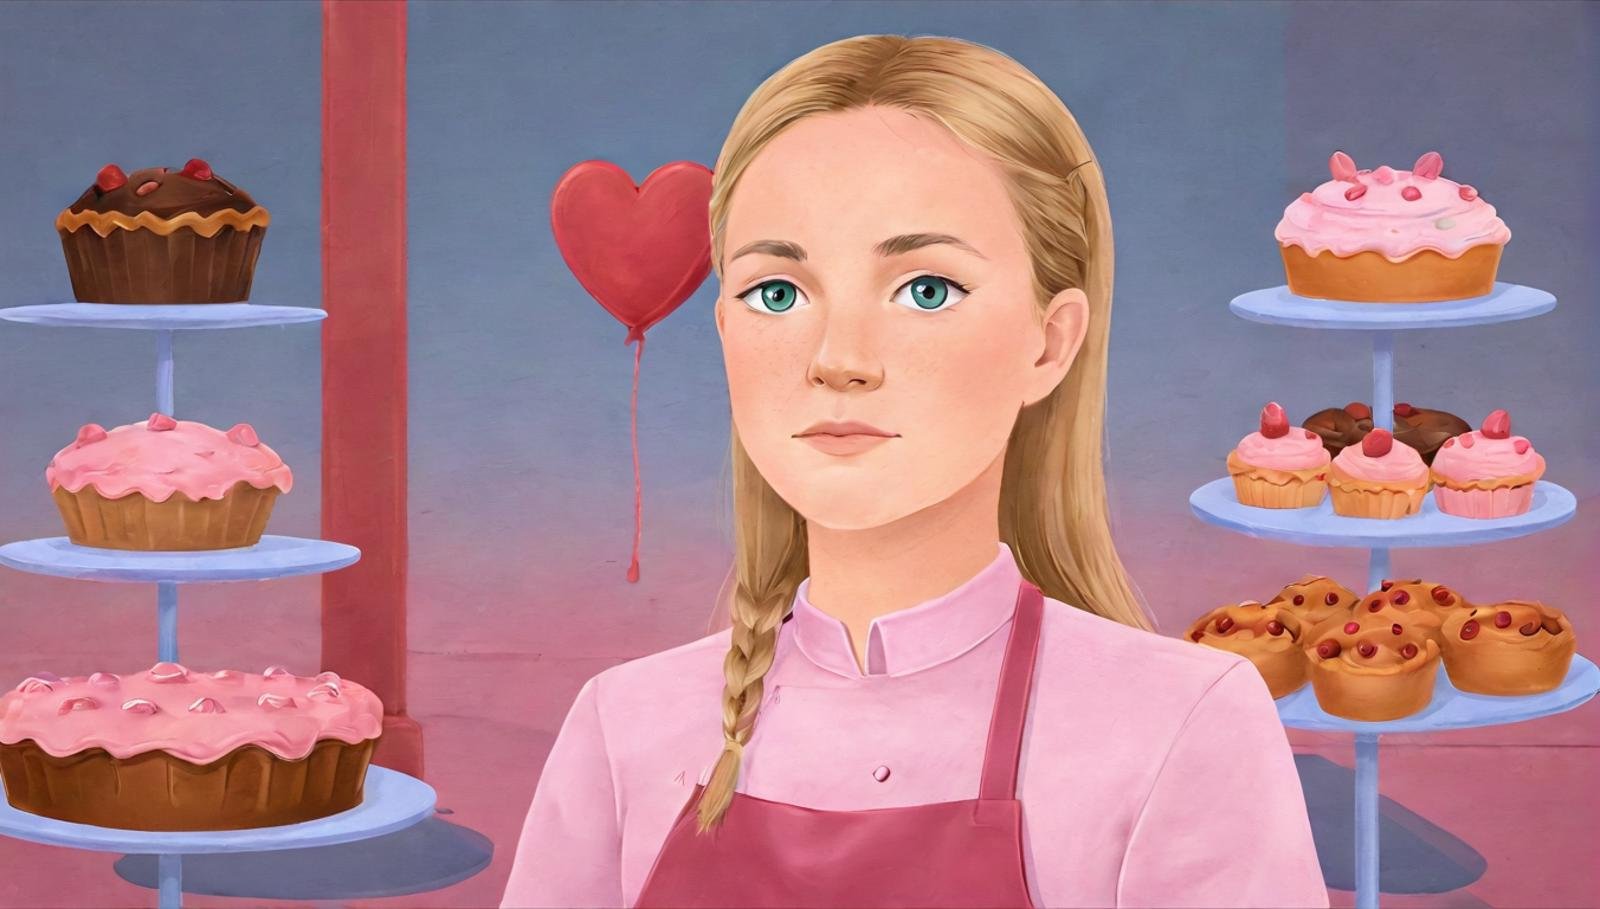 minimalistic modern illustration closeup of Agatha with a heart-shaped birthmark on her cheek and braided blonde hair, wearing a pink pastry chef uniform, surrounded by pastries and cakes, with a warm, pastel background<lora:EMS-401350-EMS:1.000000>